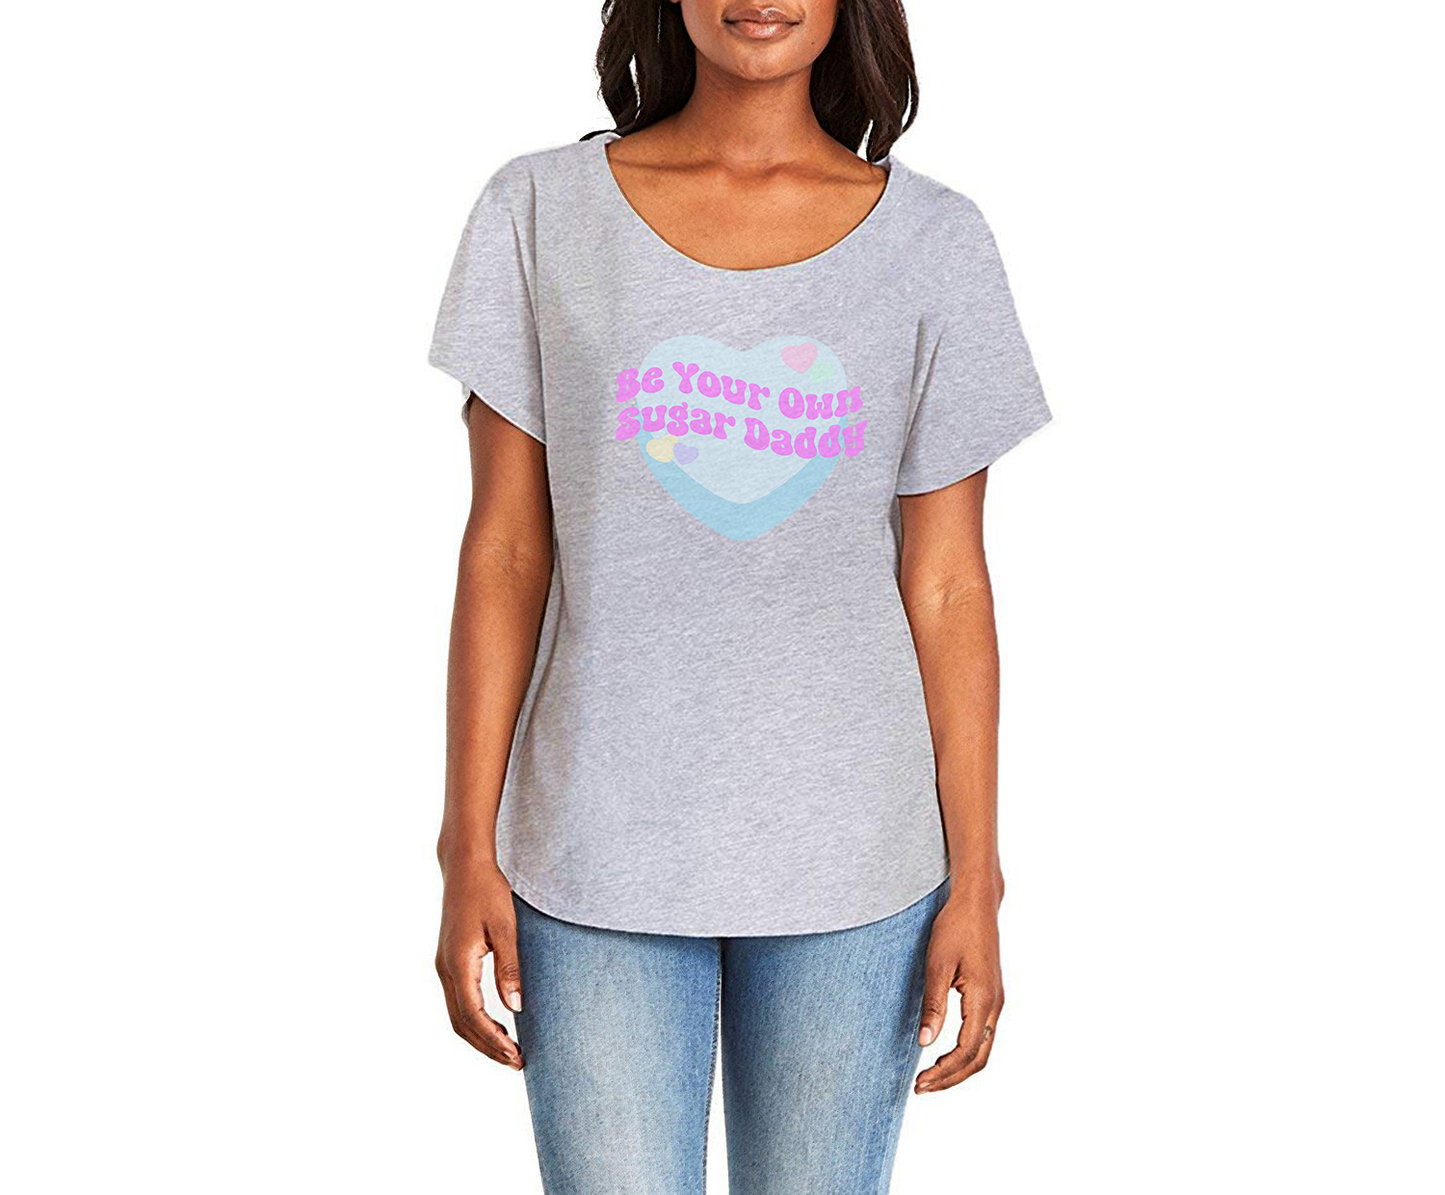 Be Your Own Sugar Daddy Ladies Tee Shirt - In Grey & White